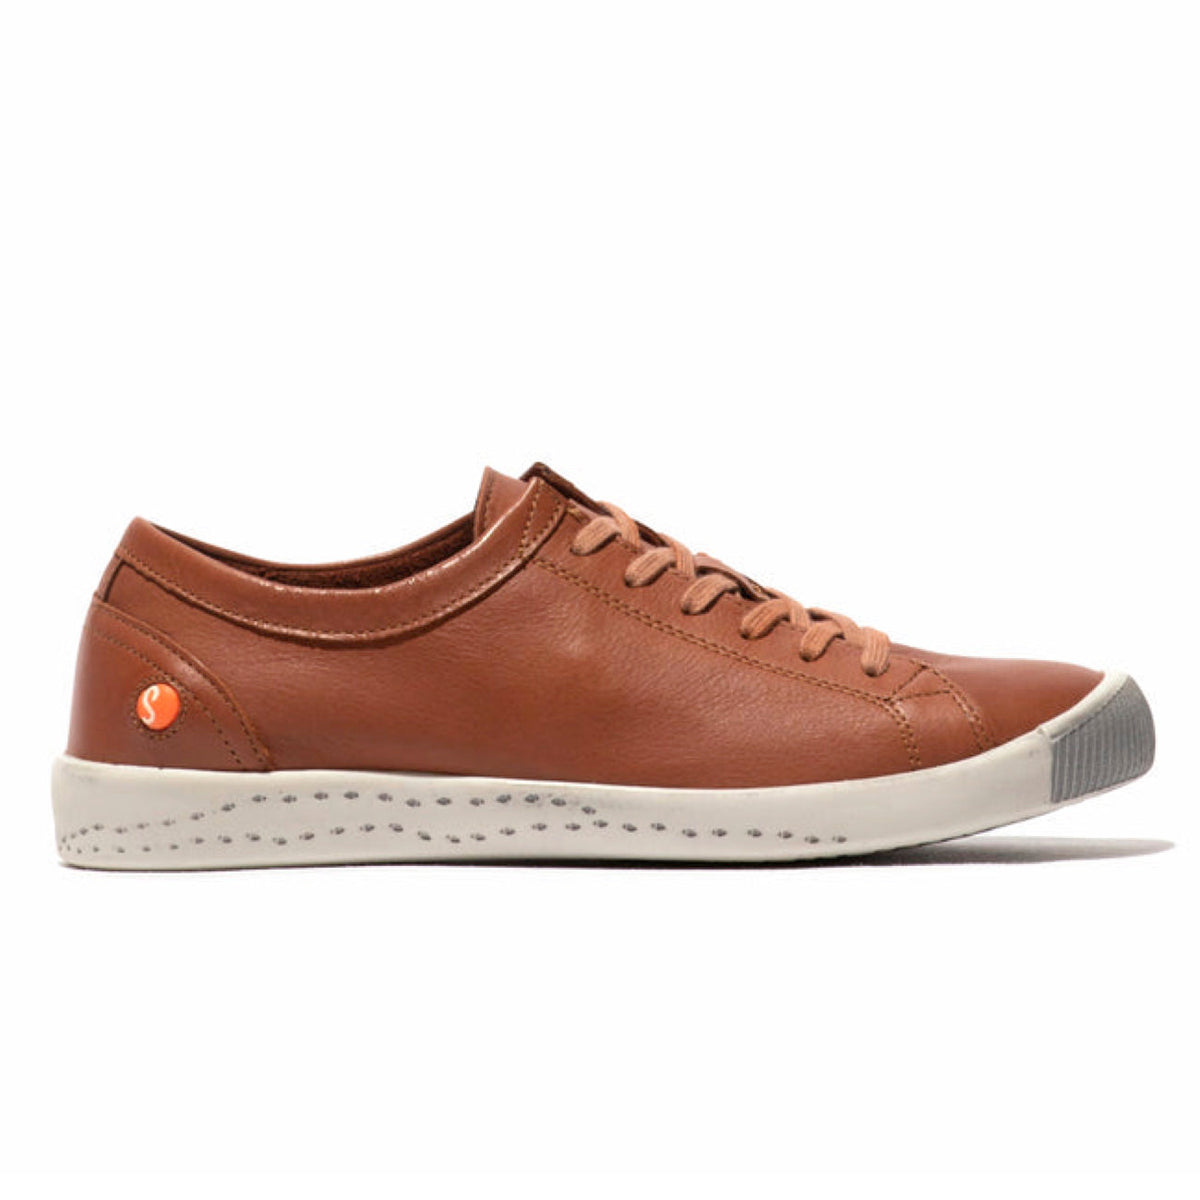 Softinos, Isla154, Laceup Shoe, Washed Leather, Cognac